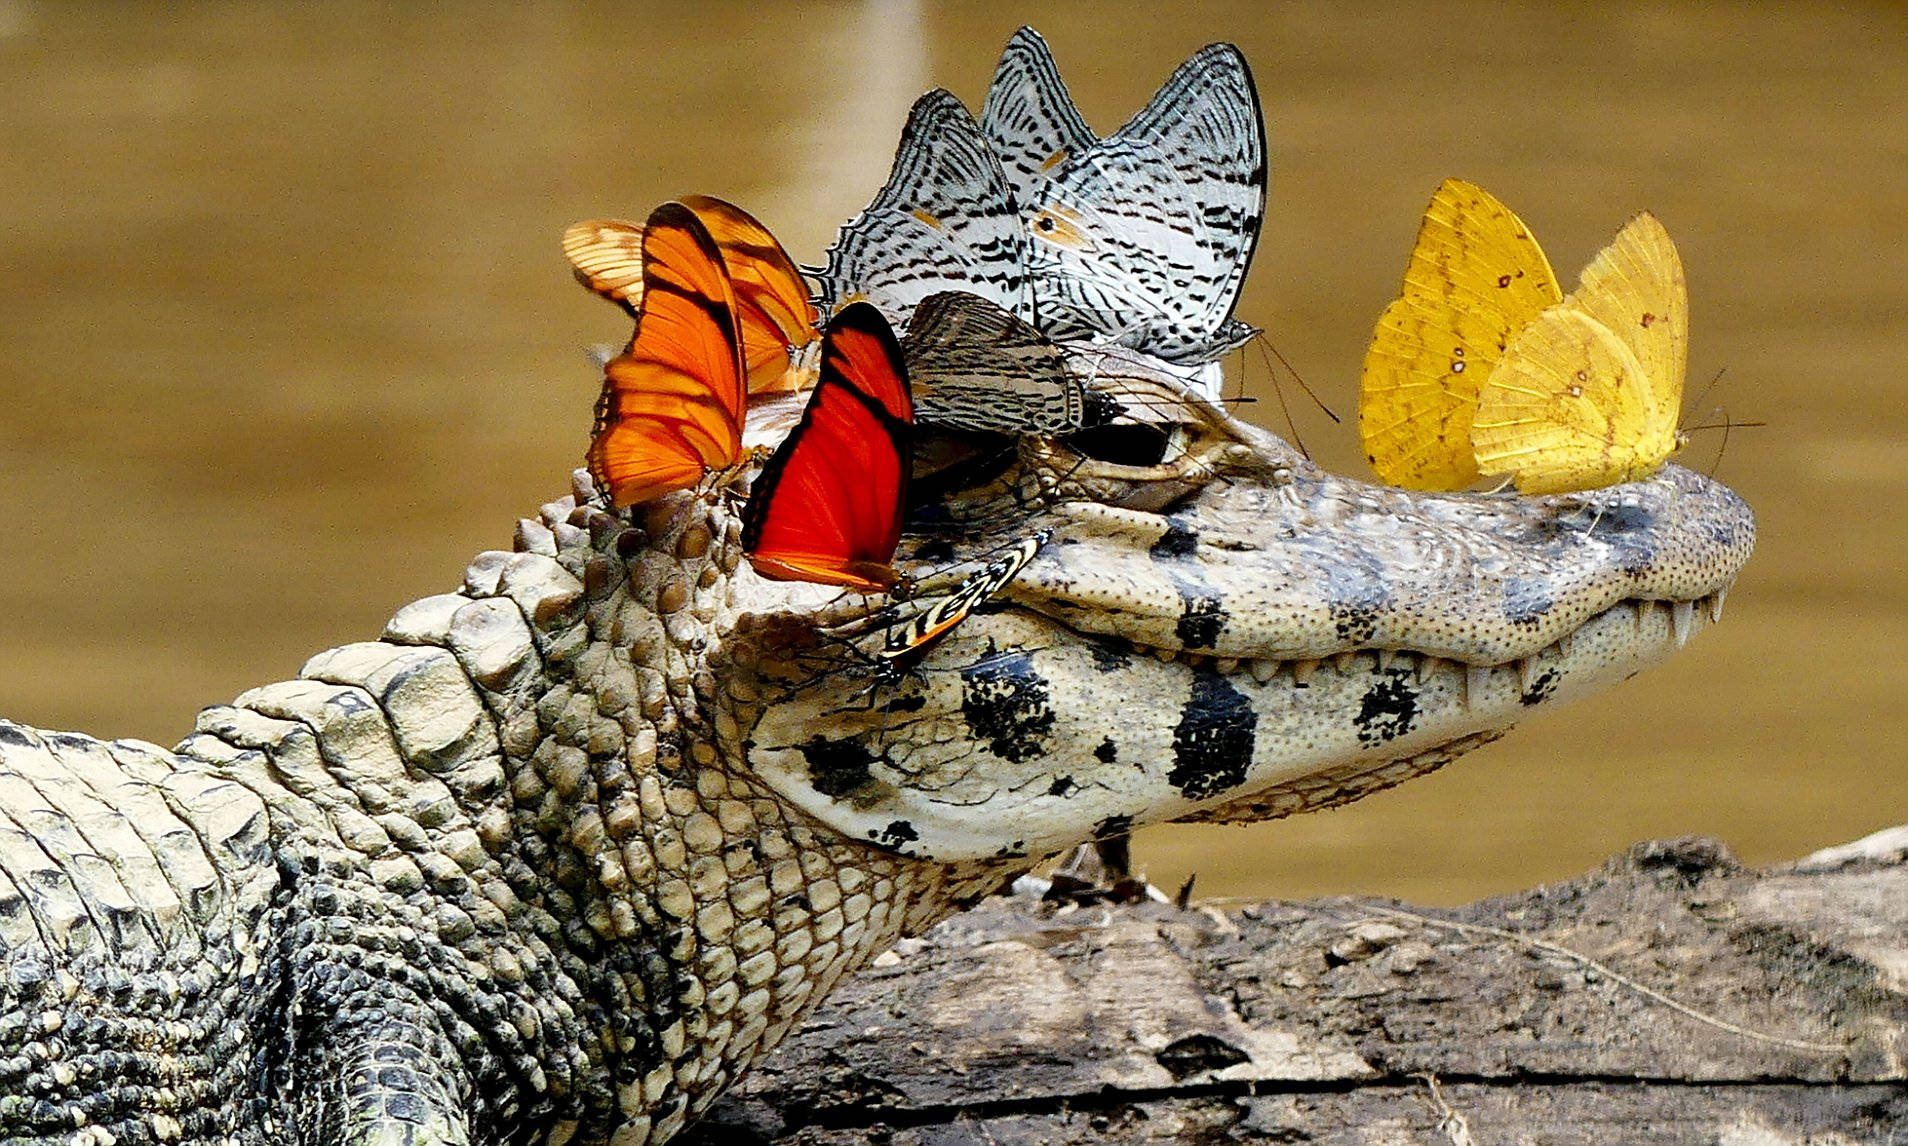 Pretty Alligator With Colorful Butterflies Background